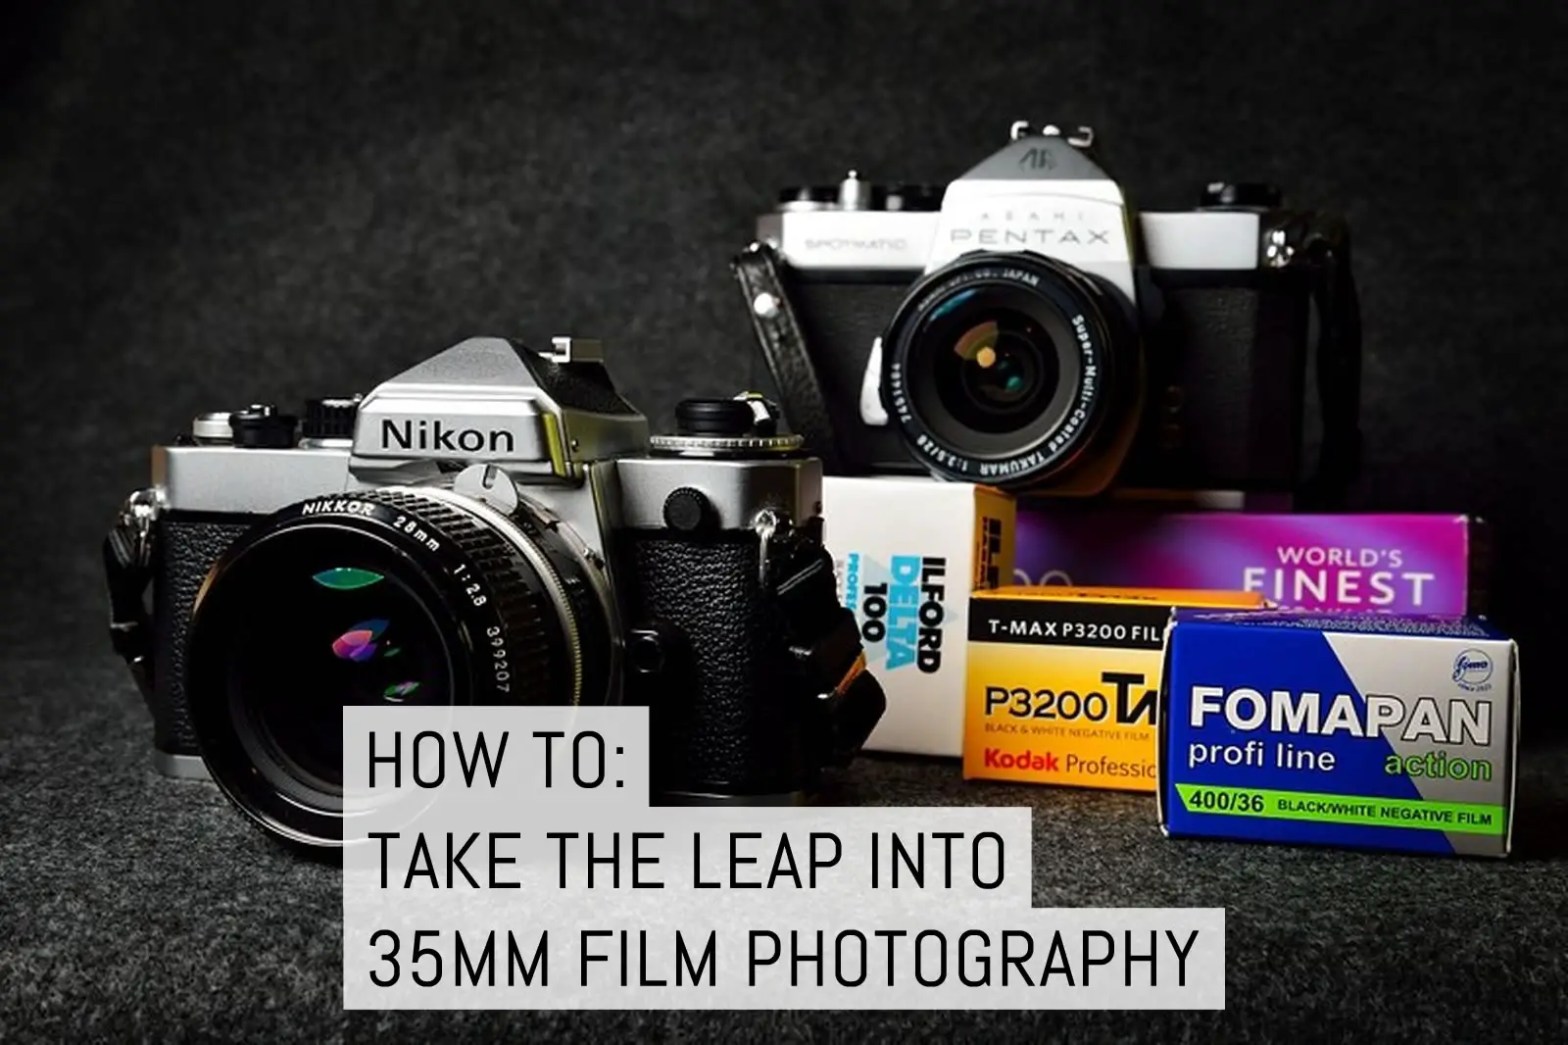 How to take the leap into 35mm film photography